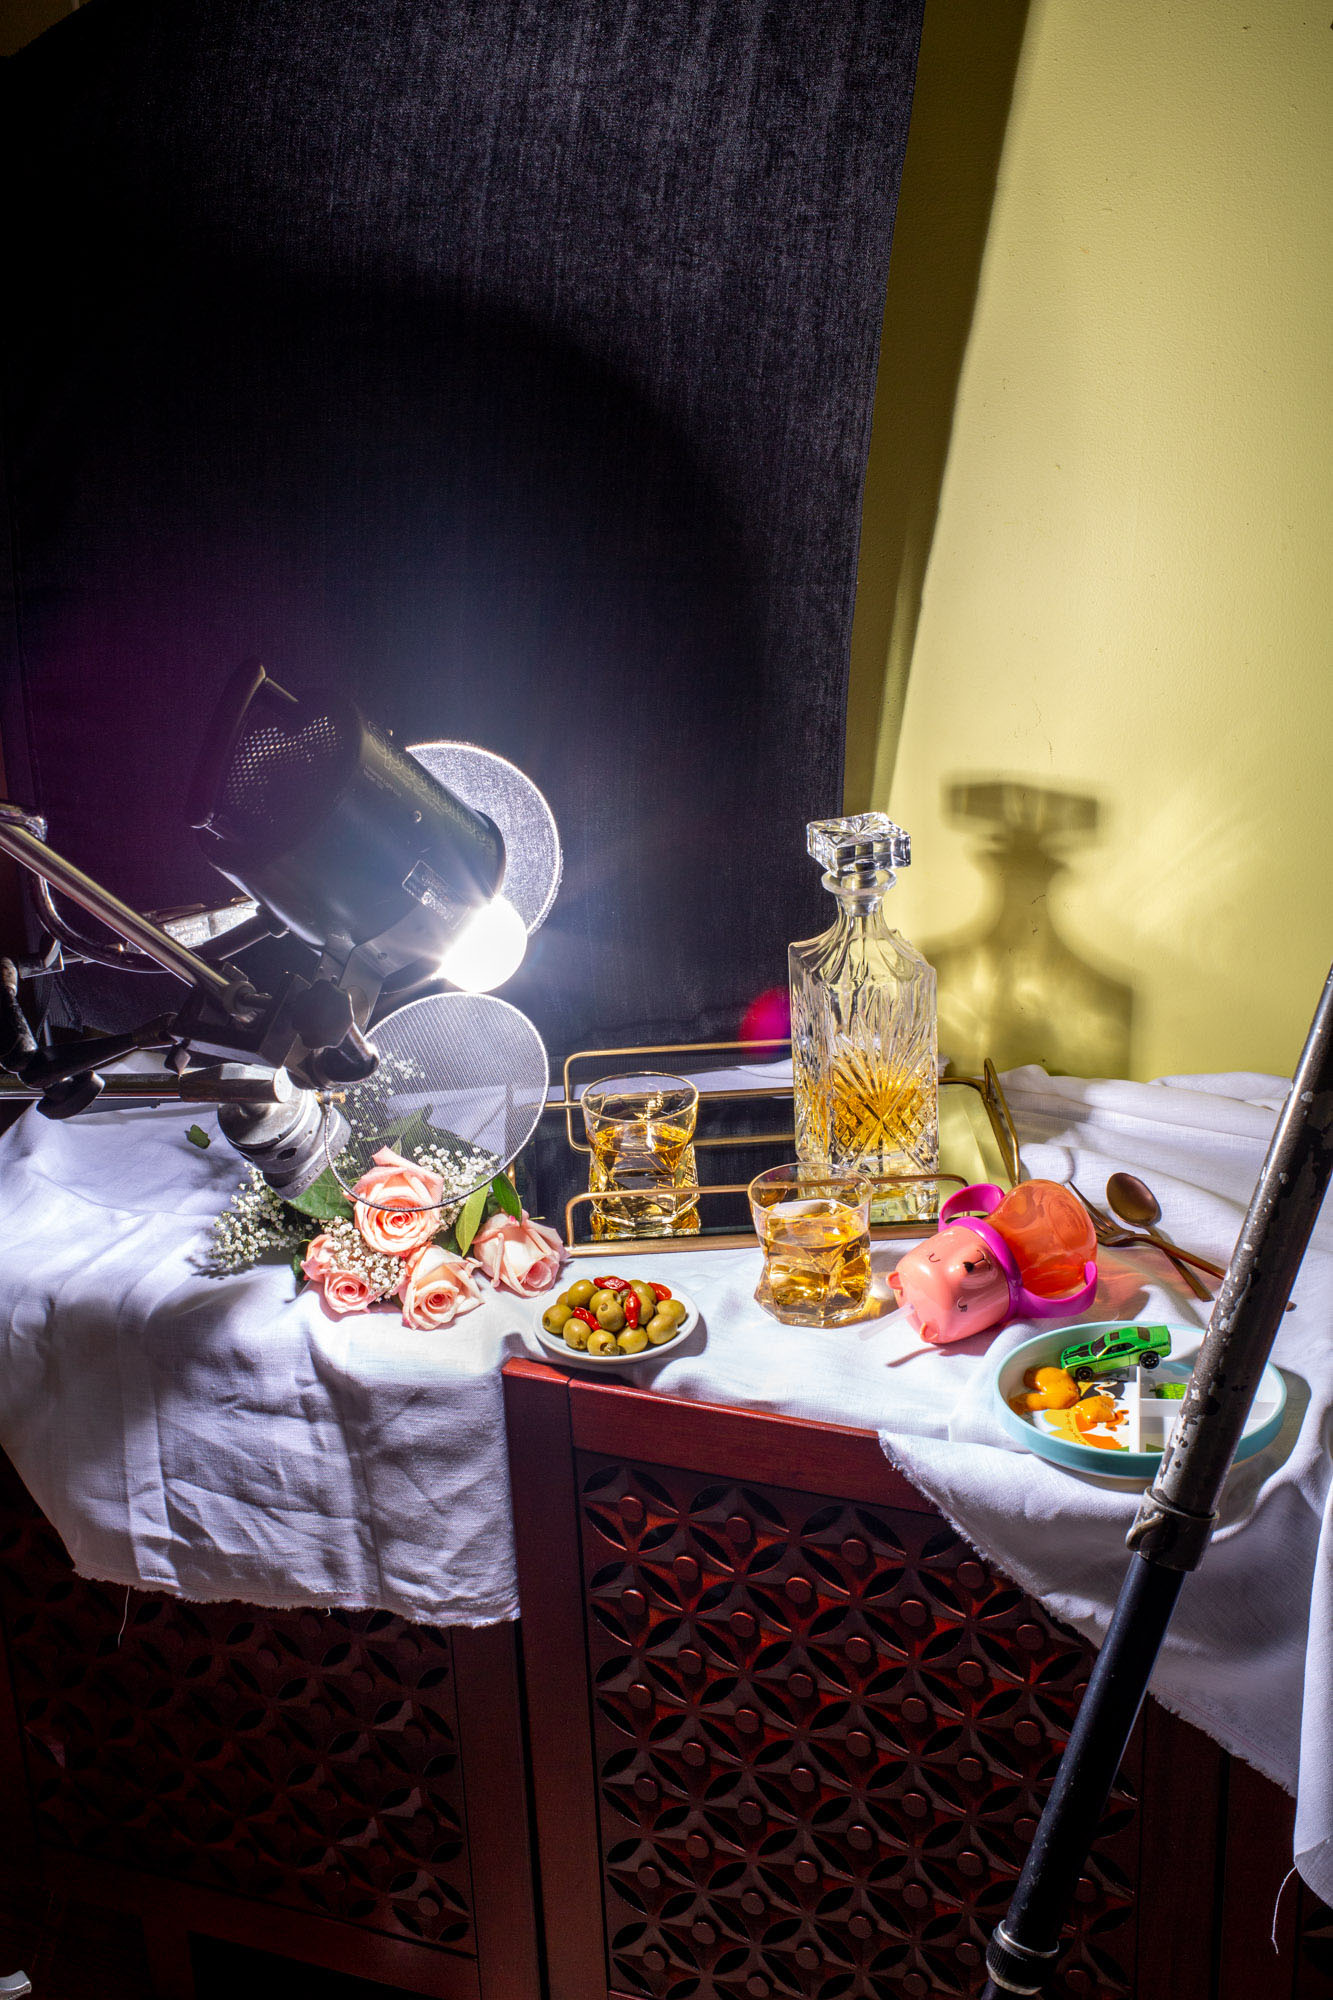 behind the scenes view of creative food photography